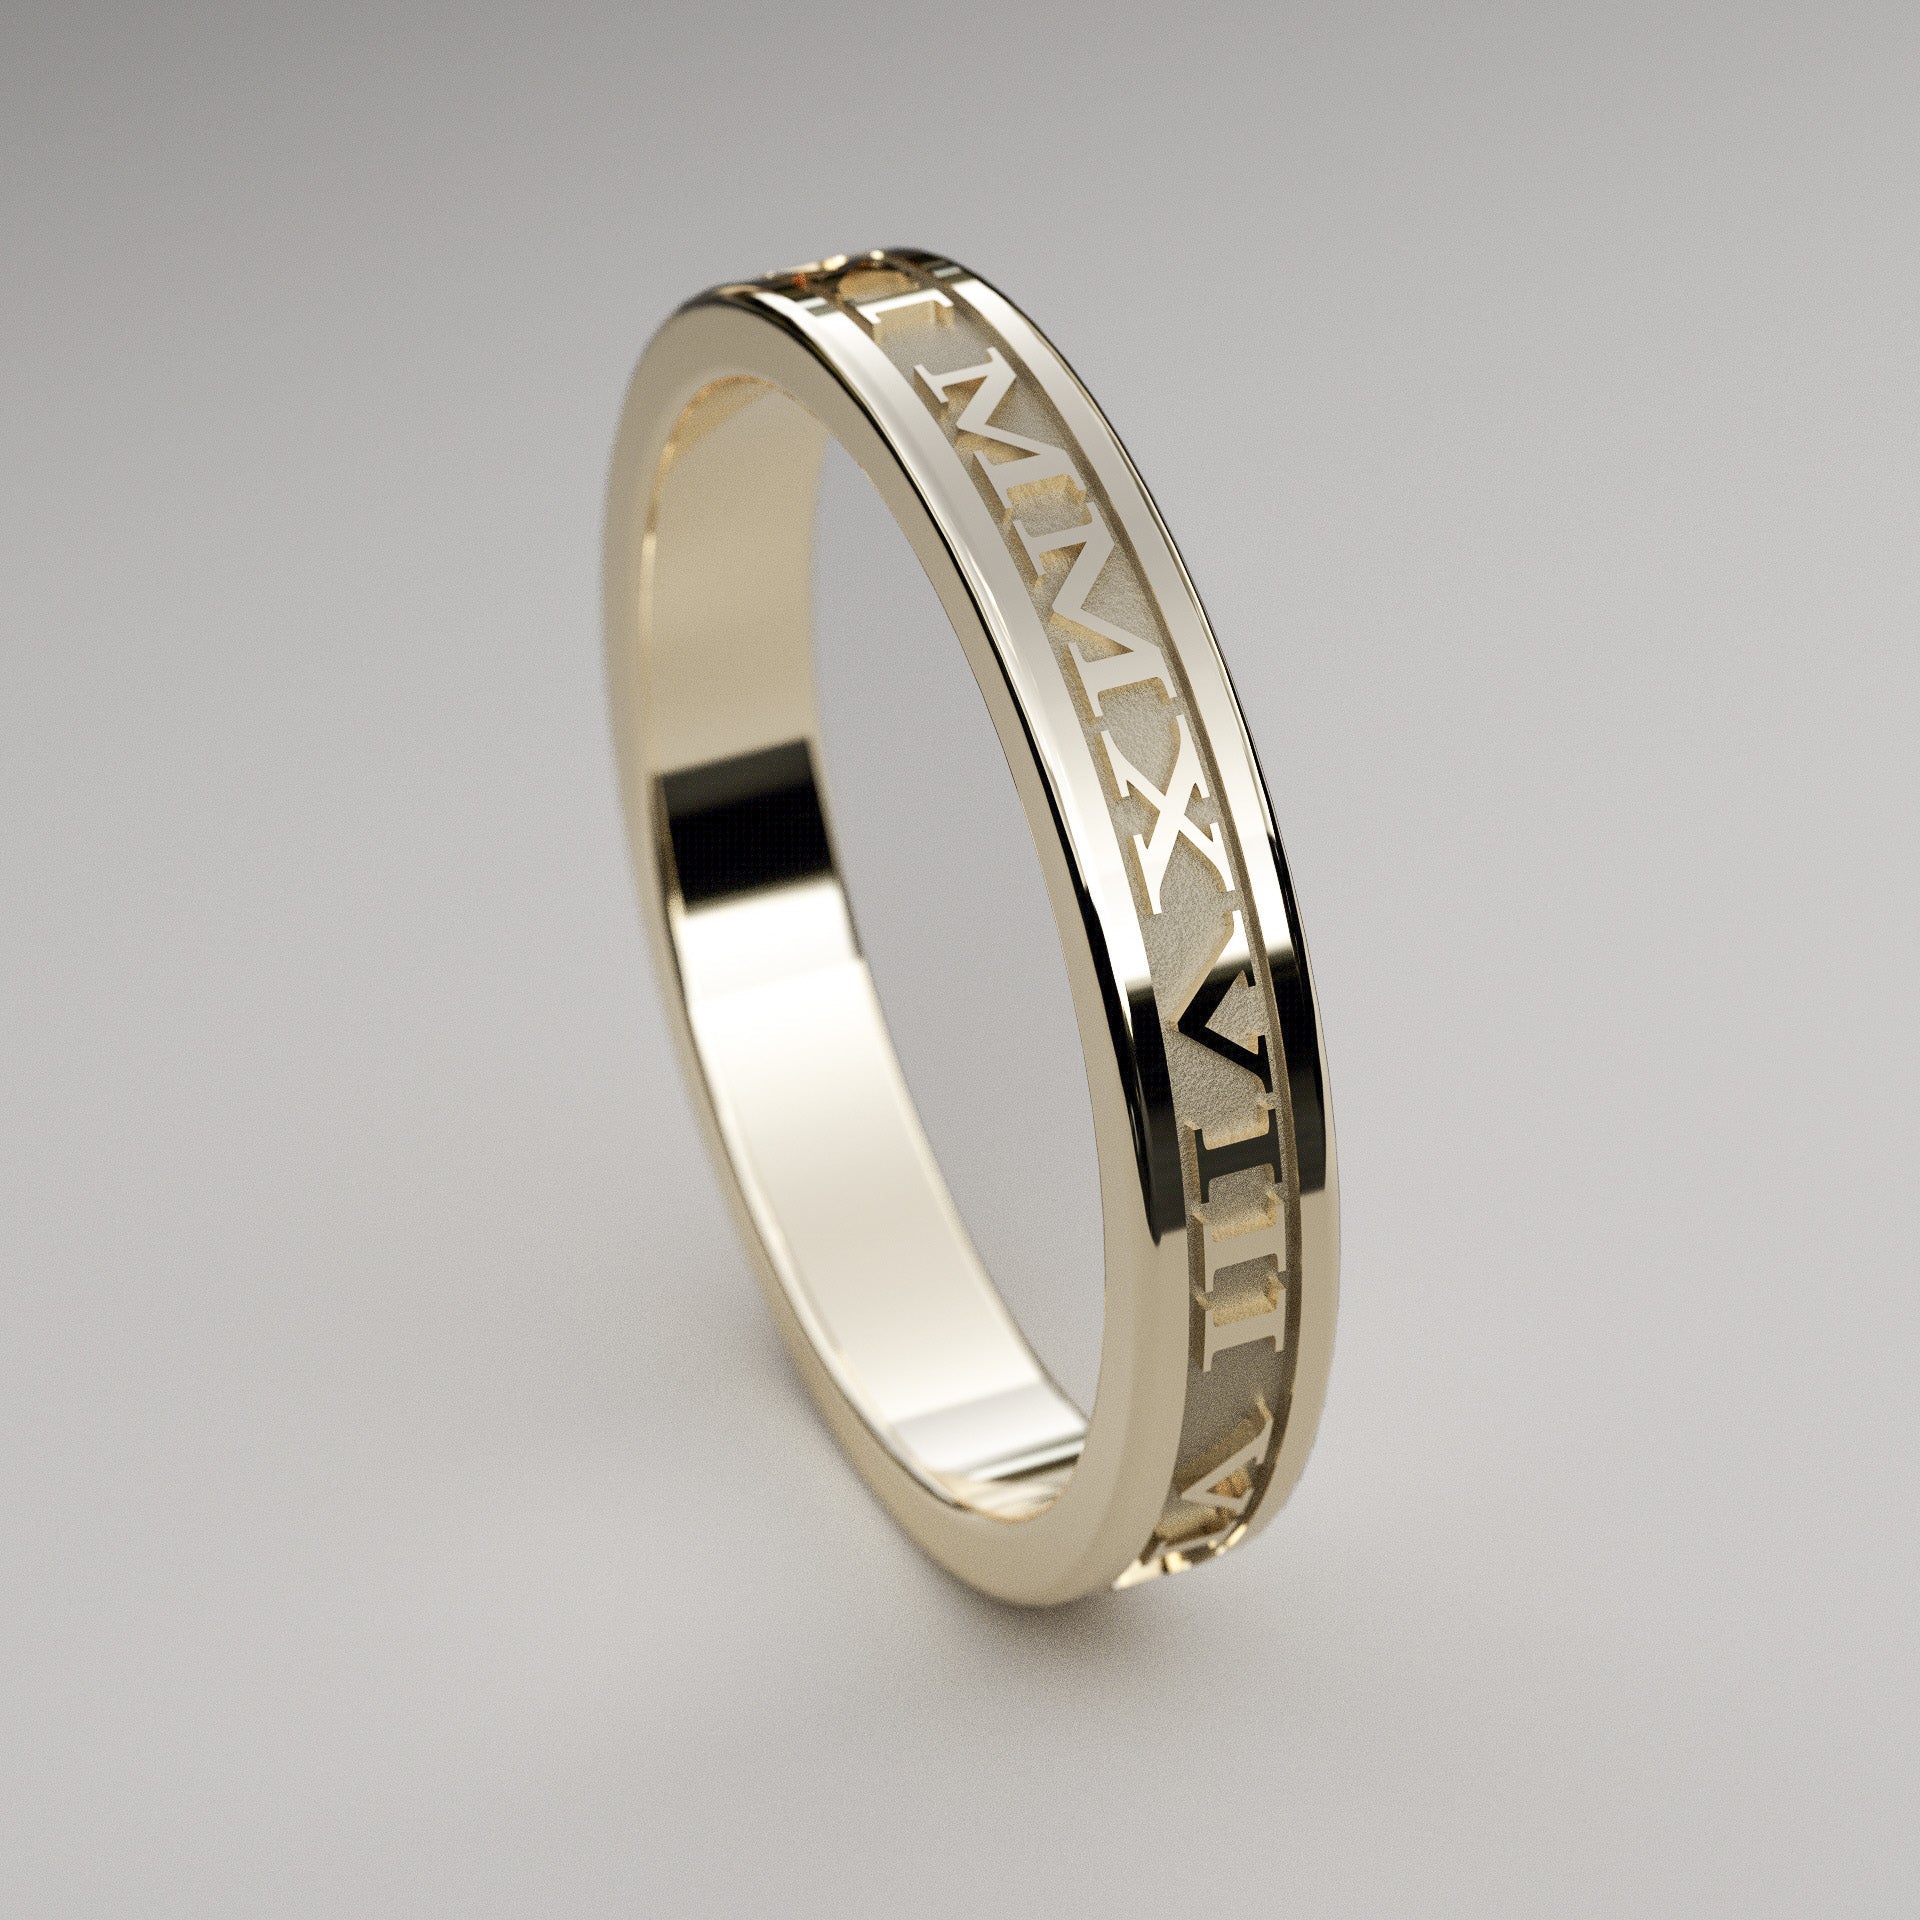 Custom Roman Numeral wedding band in 14k gold, 3mm wide